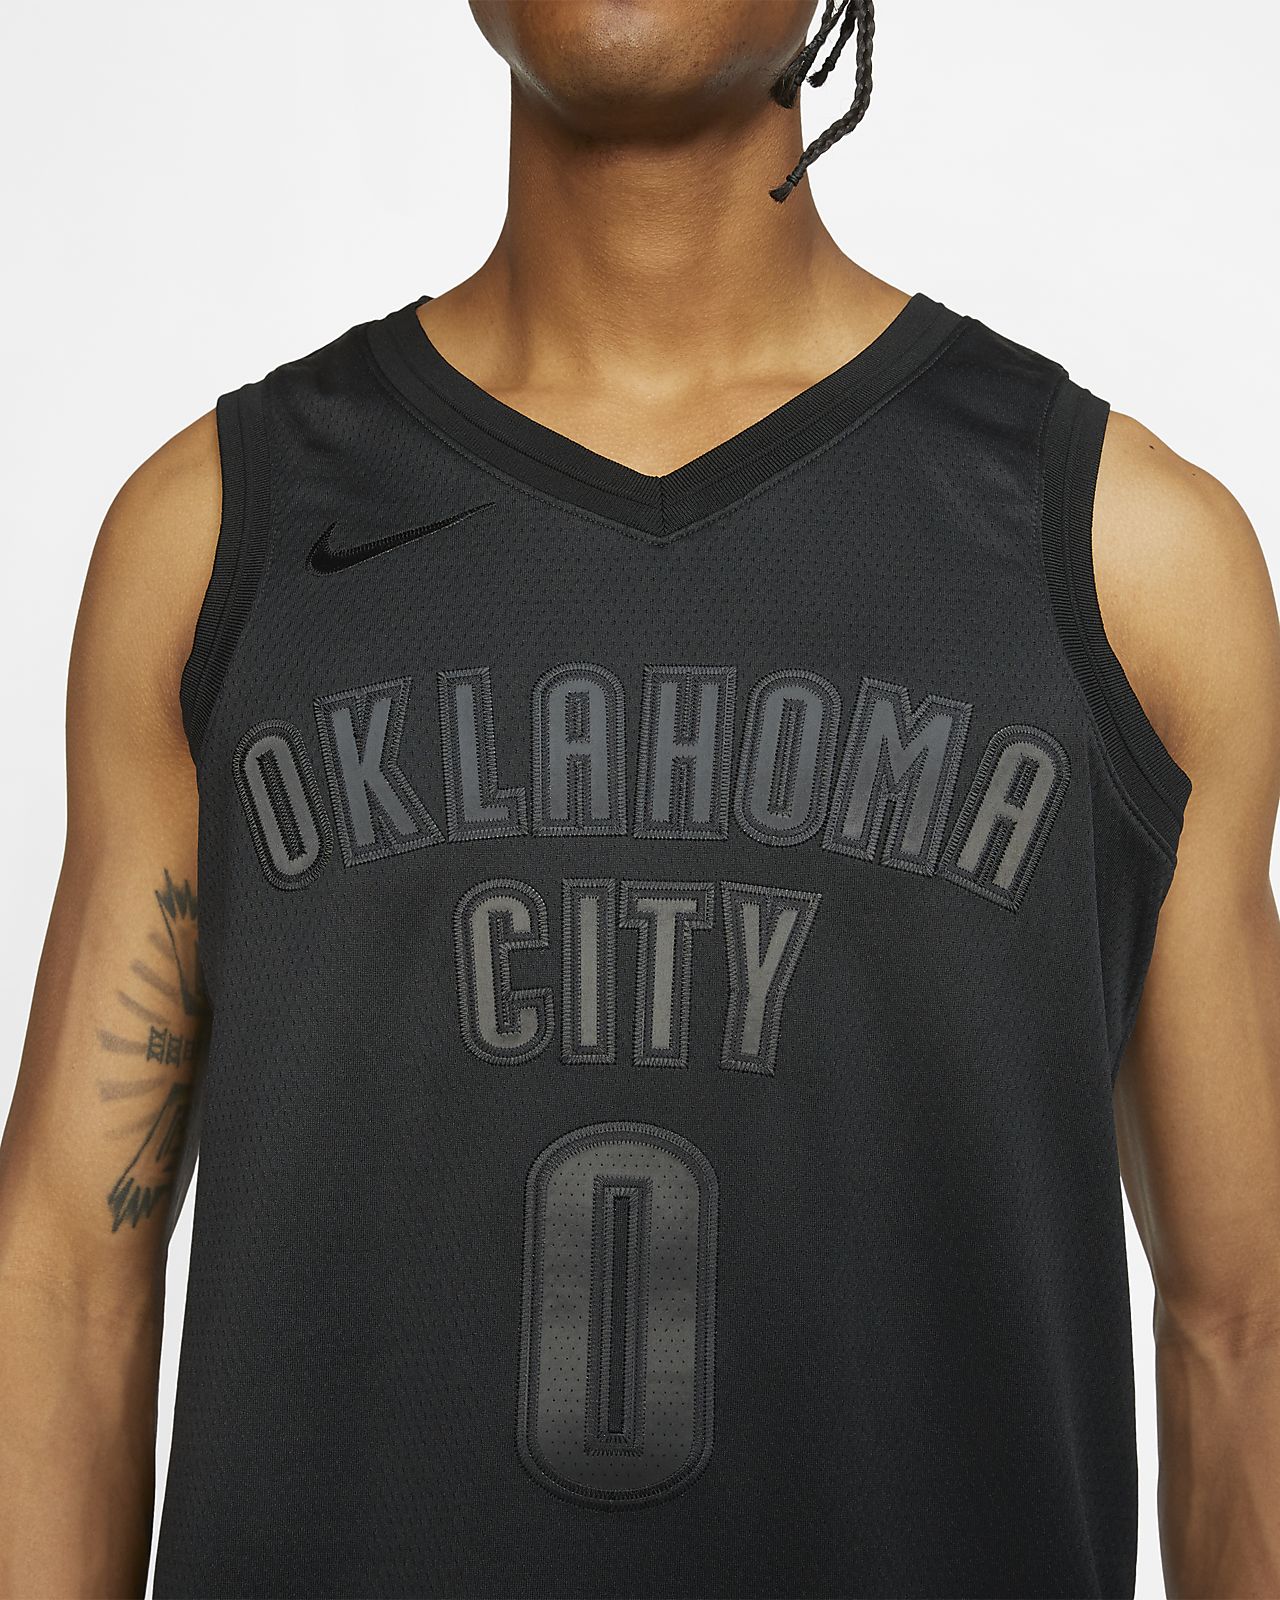 russell westbrook official jersey